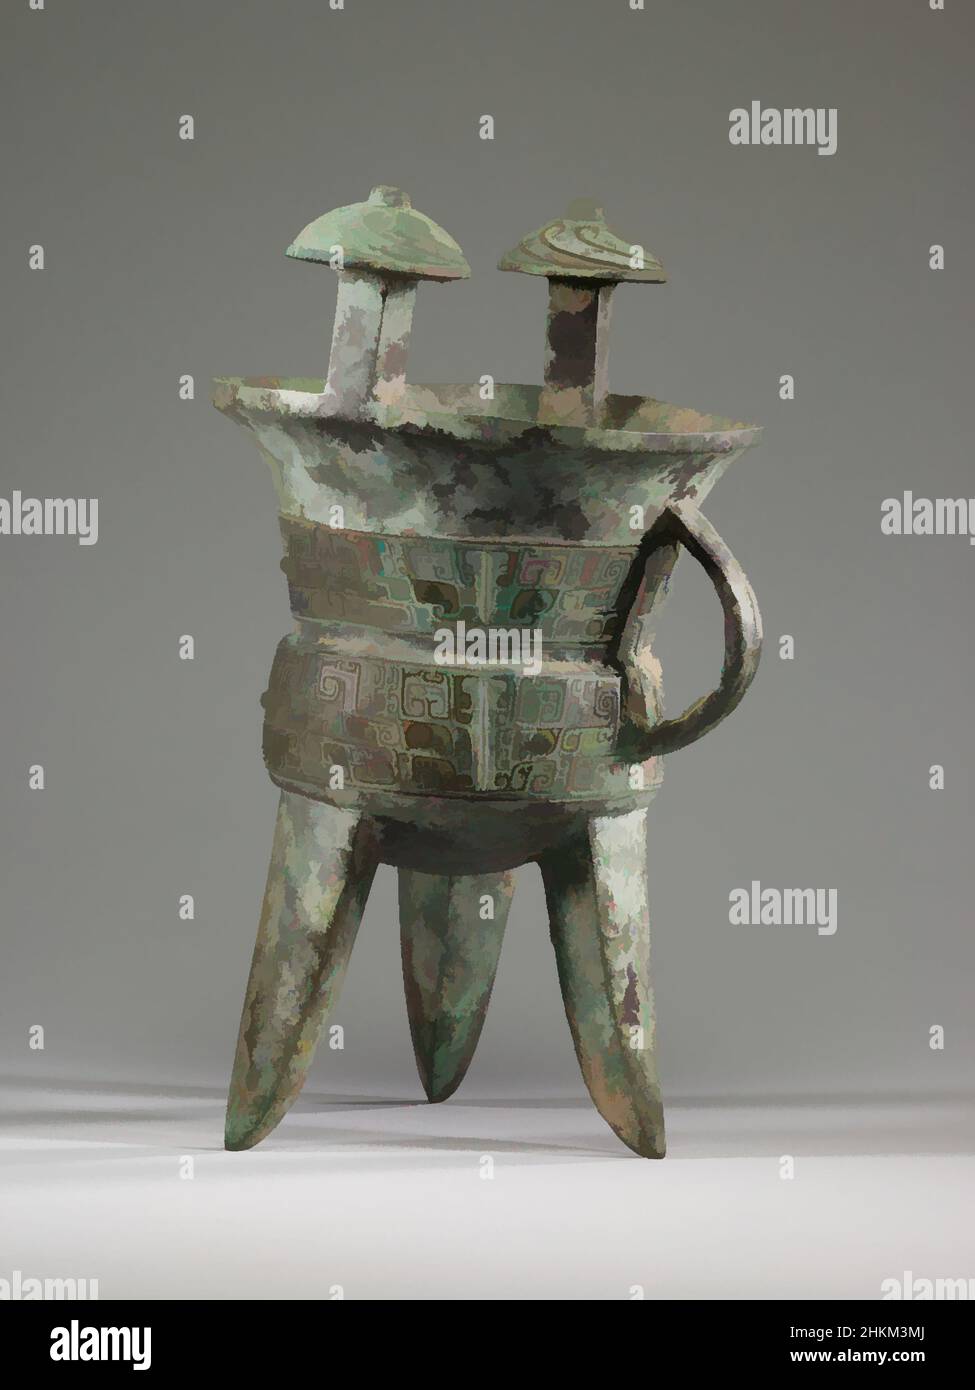 Art inspired by Tripod Wine Vessel (jia) with Design of Zoomorphic Masks, Chinese, Shang dynasty, 1600-1050 BC, 13th century BC, Bronze, China, Asia, Containers, metalwork, height: 13 1/2 in. (34.3 cm, Classic works modernized by Artotop with a splash of modernity. Shapes, color and value, eye-catching visual impact on art. Emotions through freedom of artworks in a contemporary way. A timeless message pursuing a wildly creative new direction. Artists turning to the digital medium and creating the Artotop NFT Stock Photo